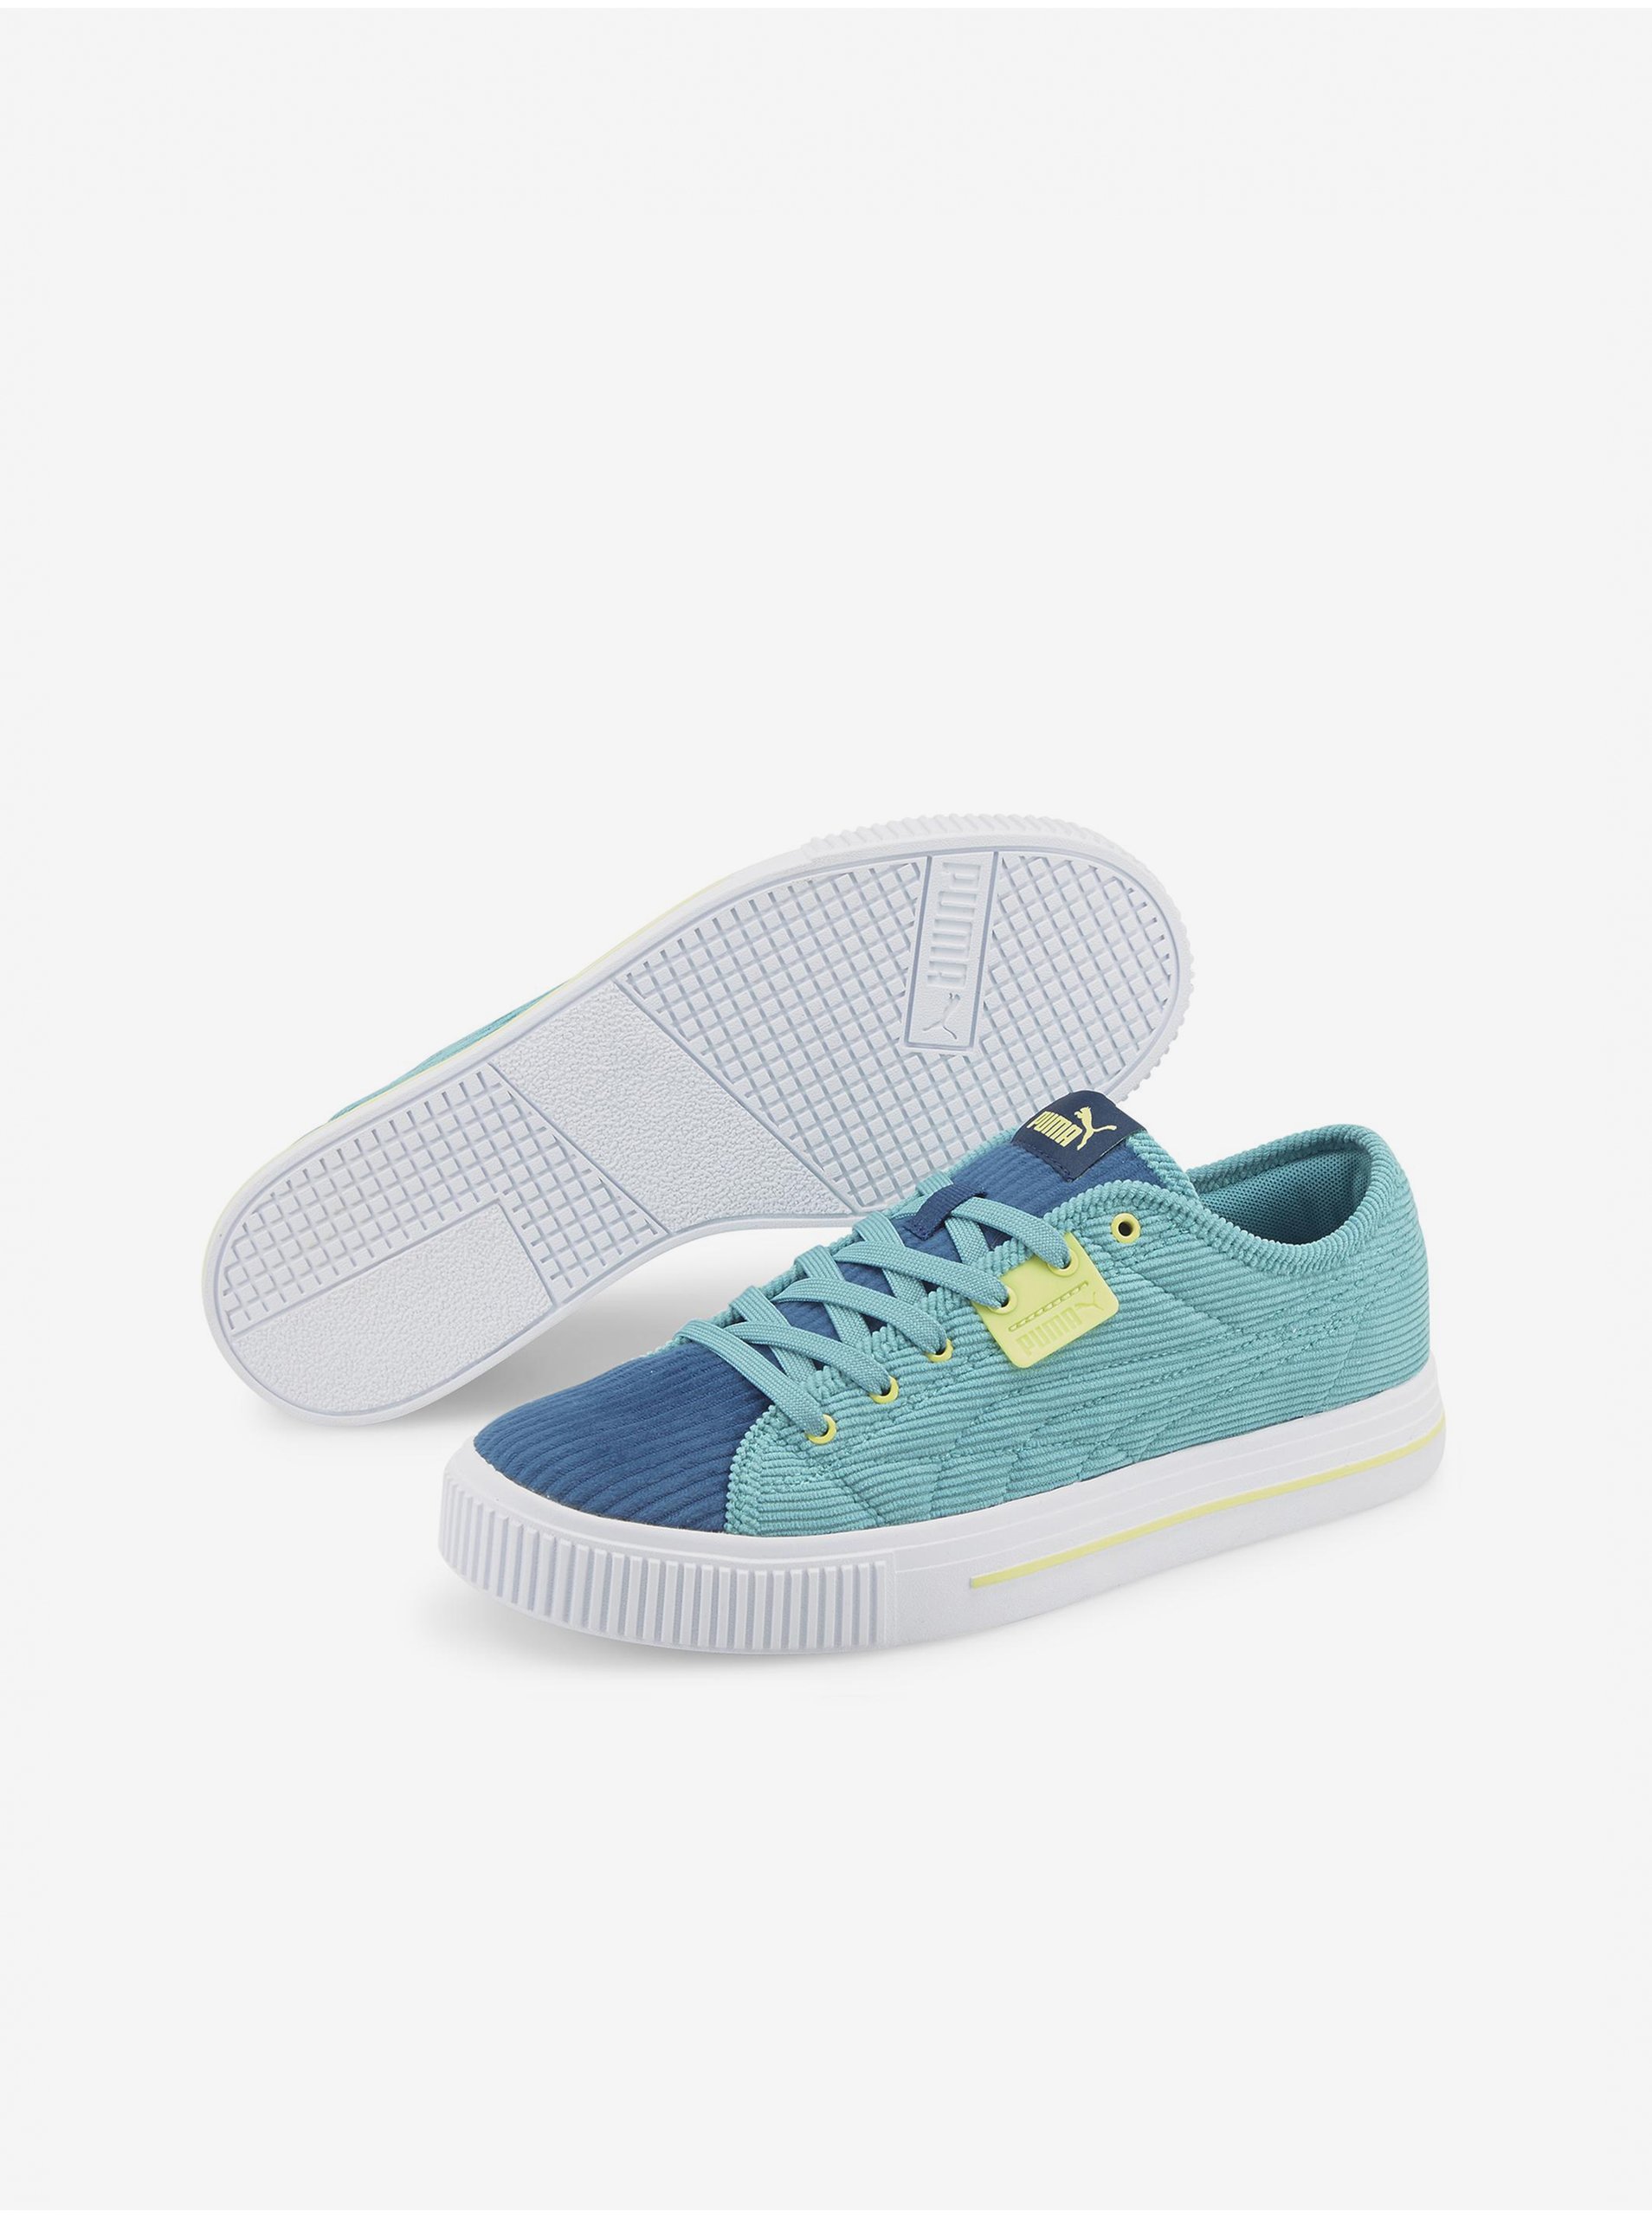 Turquoise Sneakers Puma Ever Cord - Men